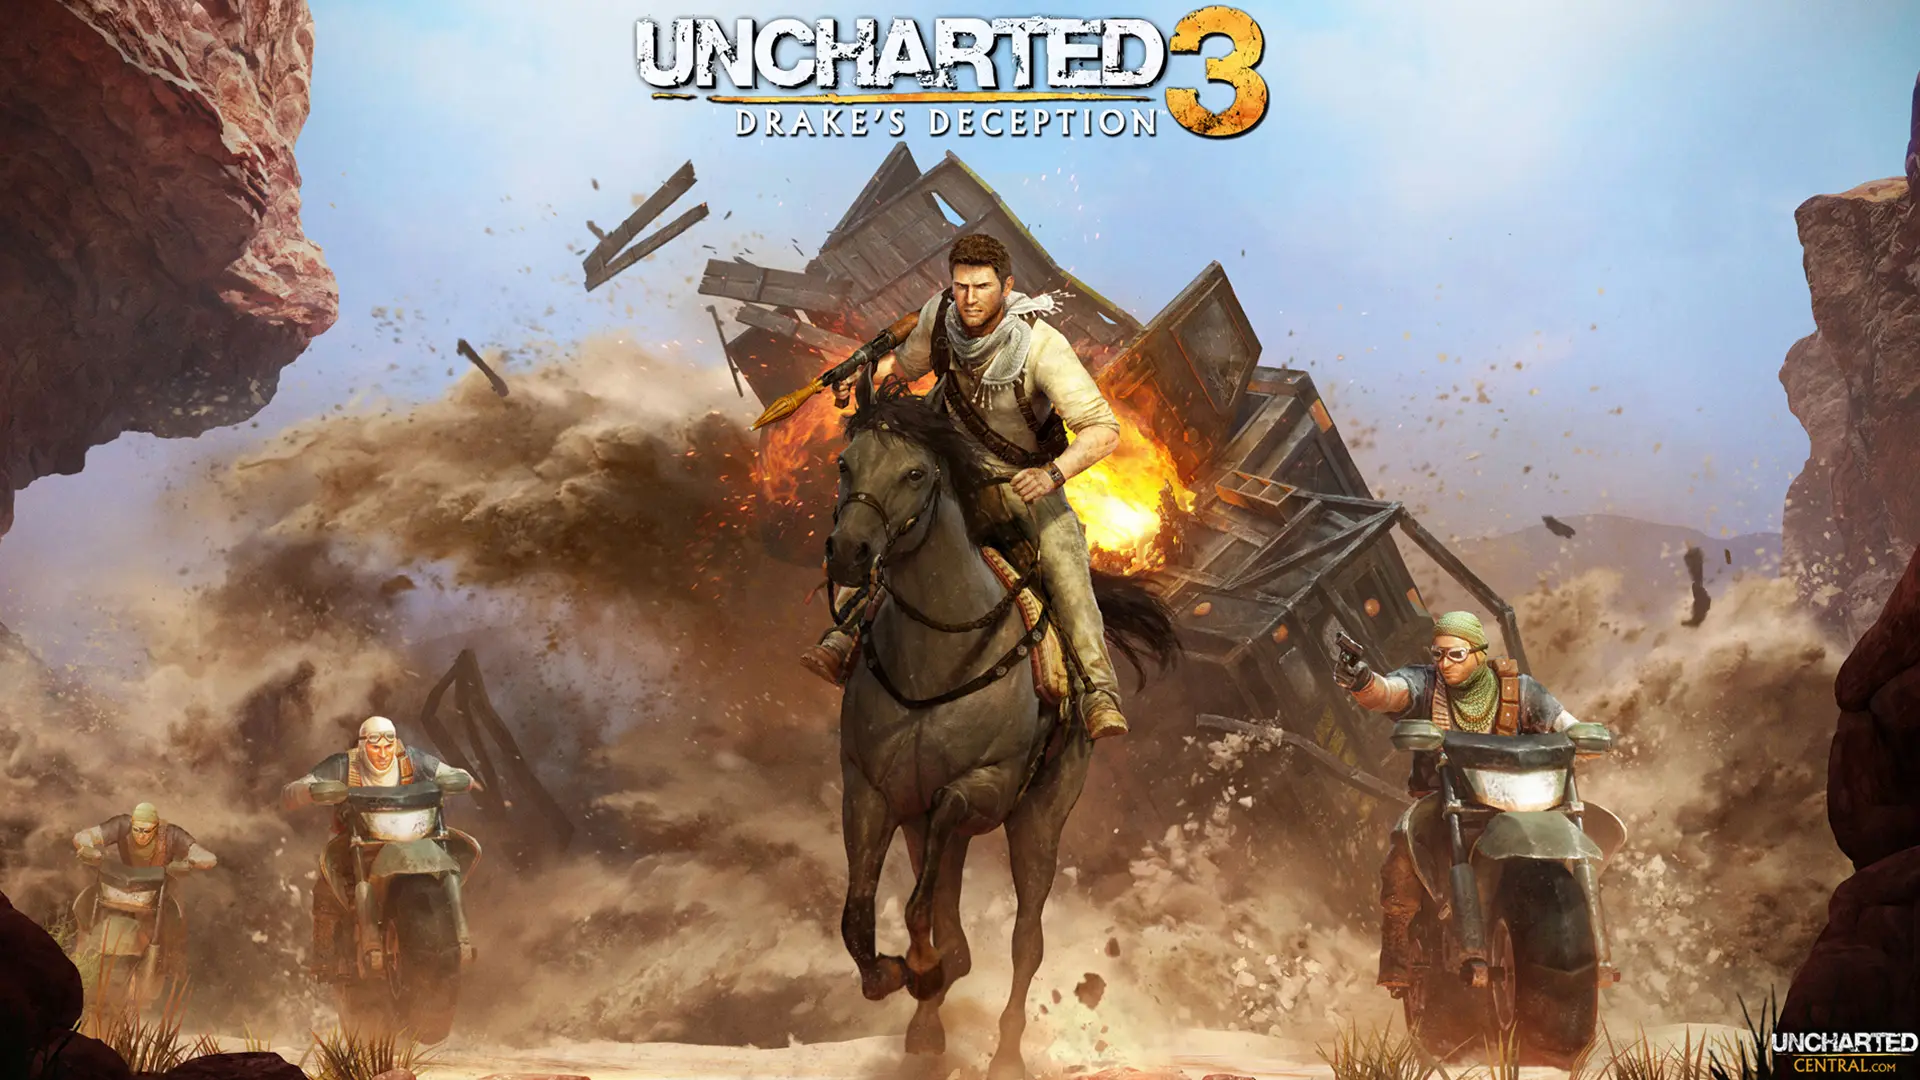 Game Uncharted 3 Drakes Deception wallpaper 6 | Background Image